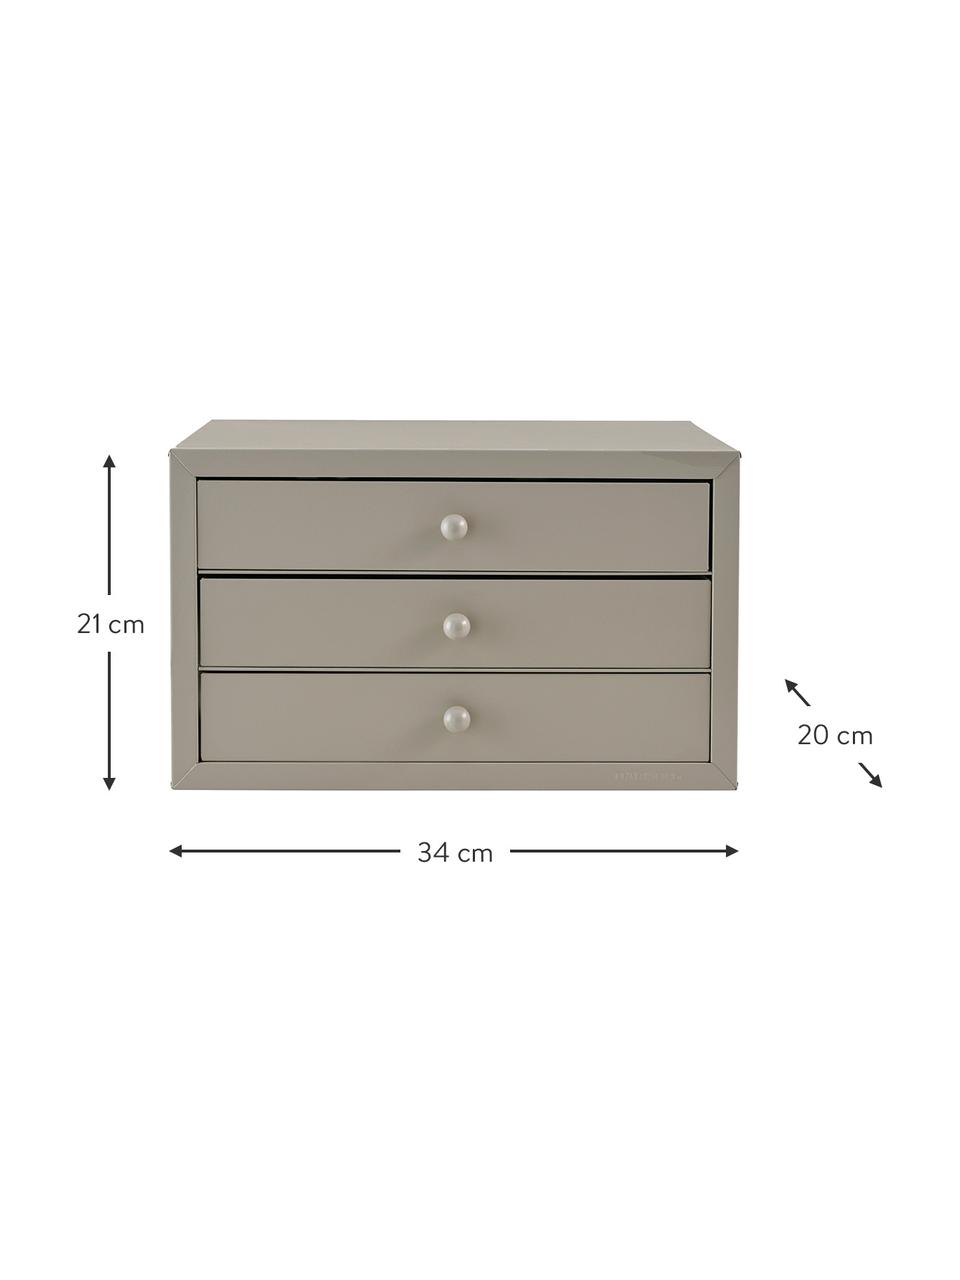 Büro-Organizer Astra in Taupe, Metall, lackiert, Taupe, B 34 x H 21 cm